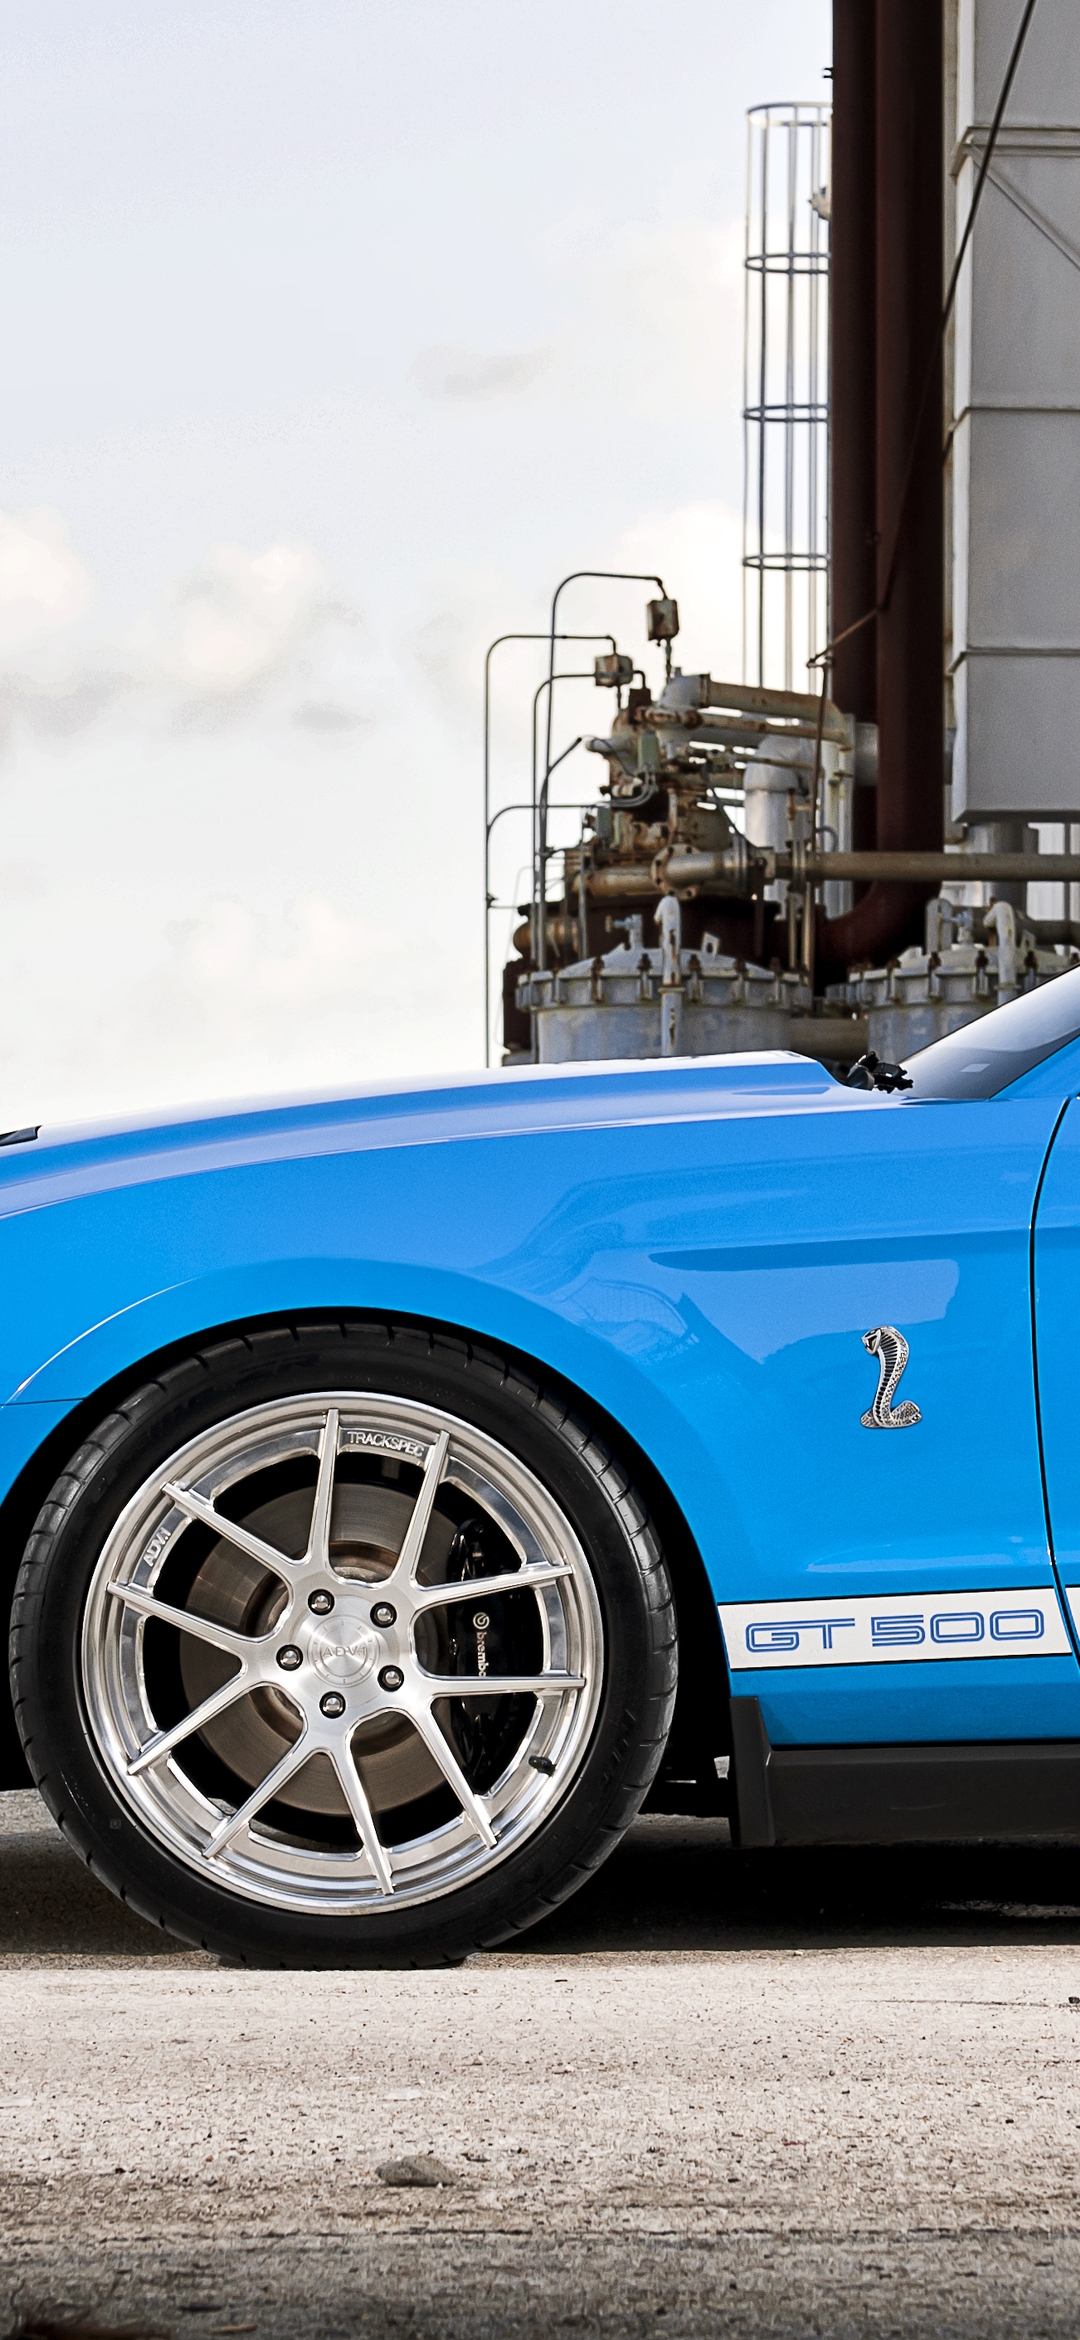 Image: Ford, Mustang, Shelby, GT 500, blue, wheel, fence, mesh